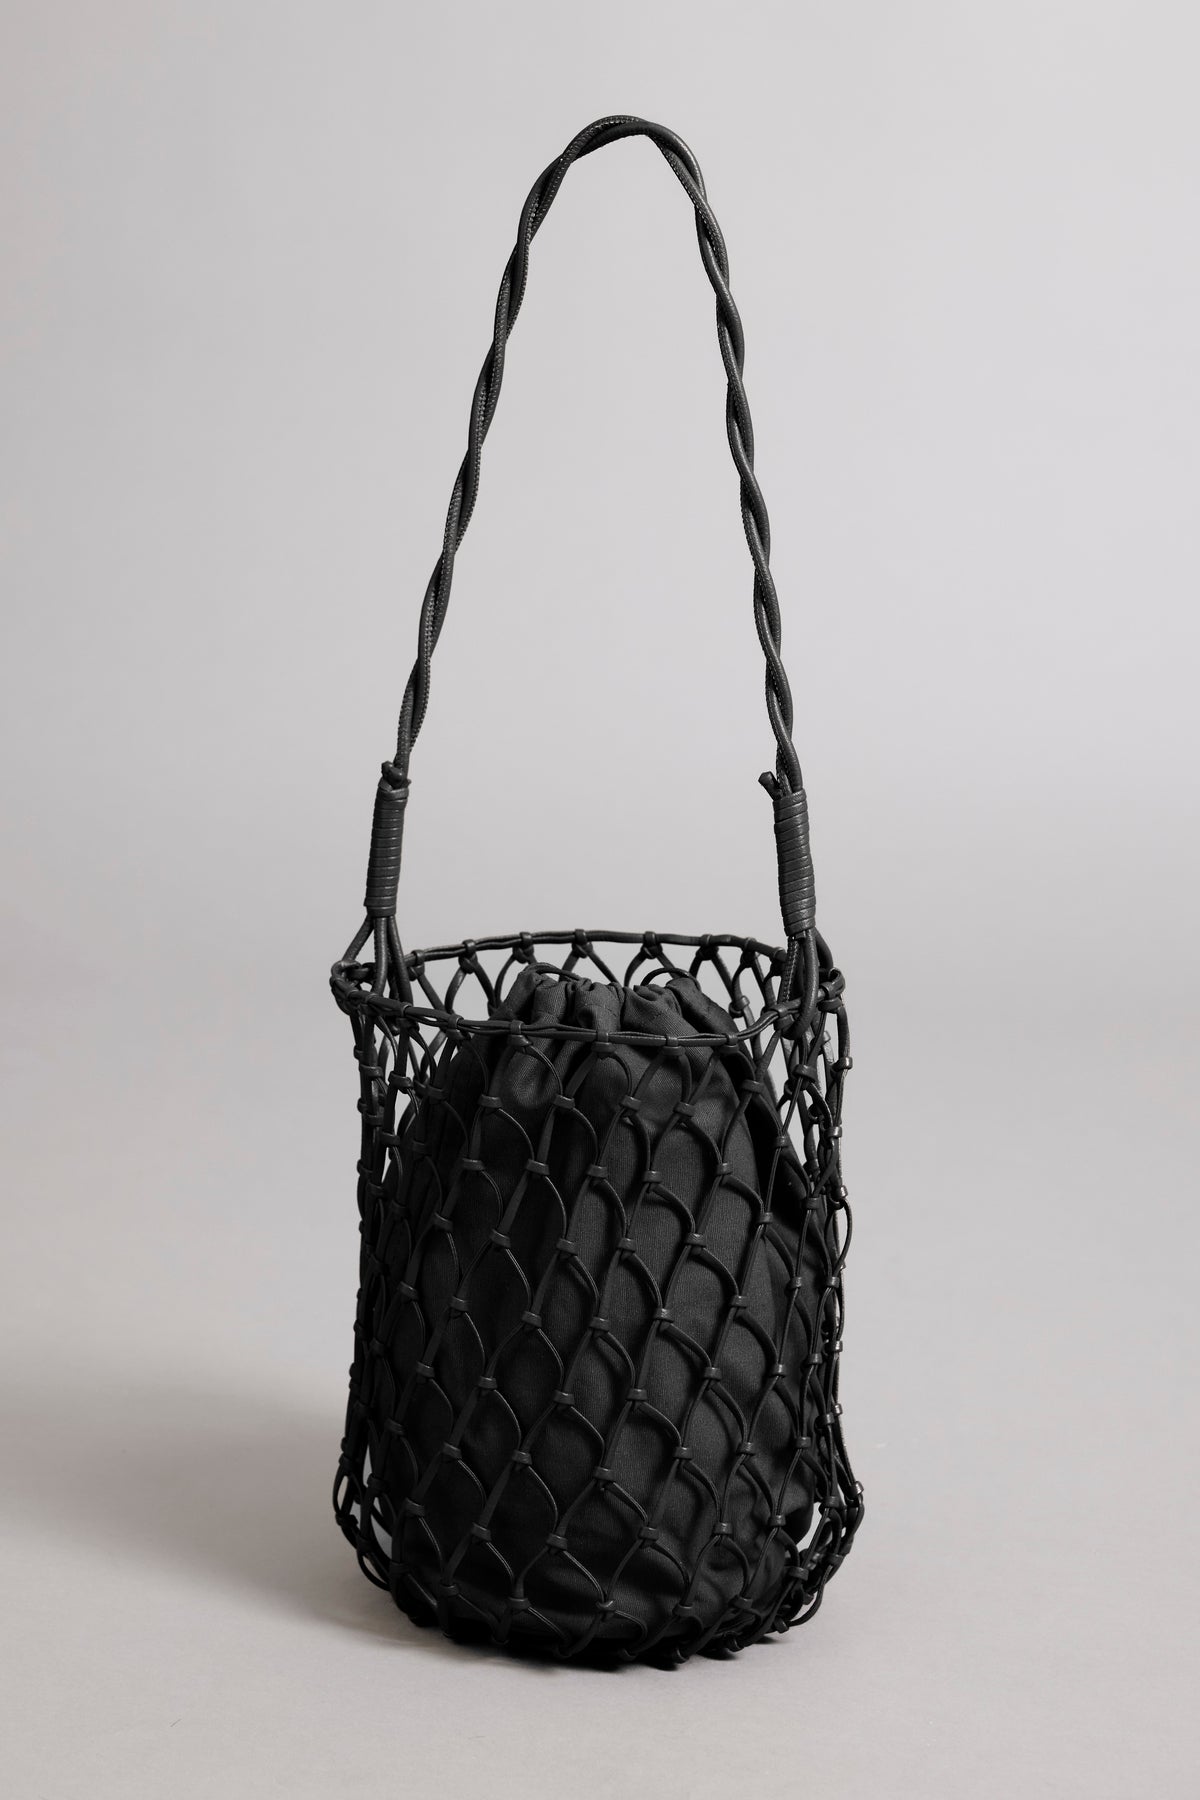 A black Velvet by Graham & Spencer mesh tote bag with a braided vegan leather strap and cinched top, standing against a plain light background.-36280402116801